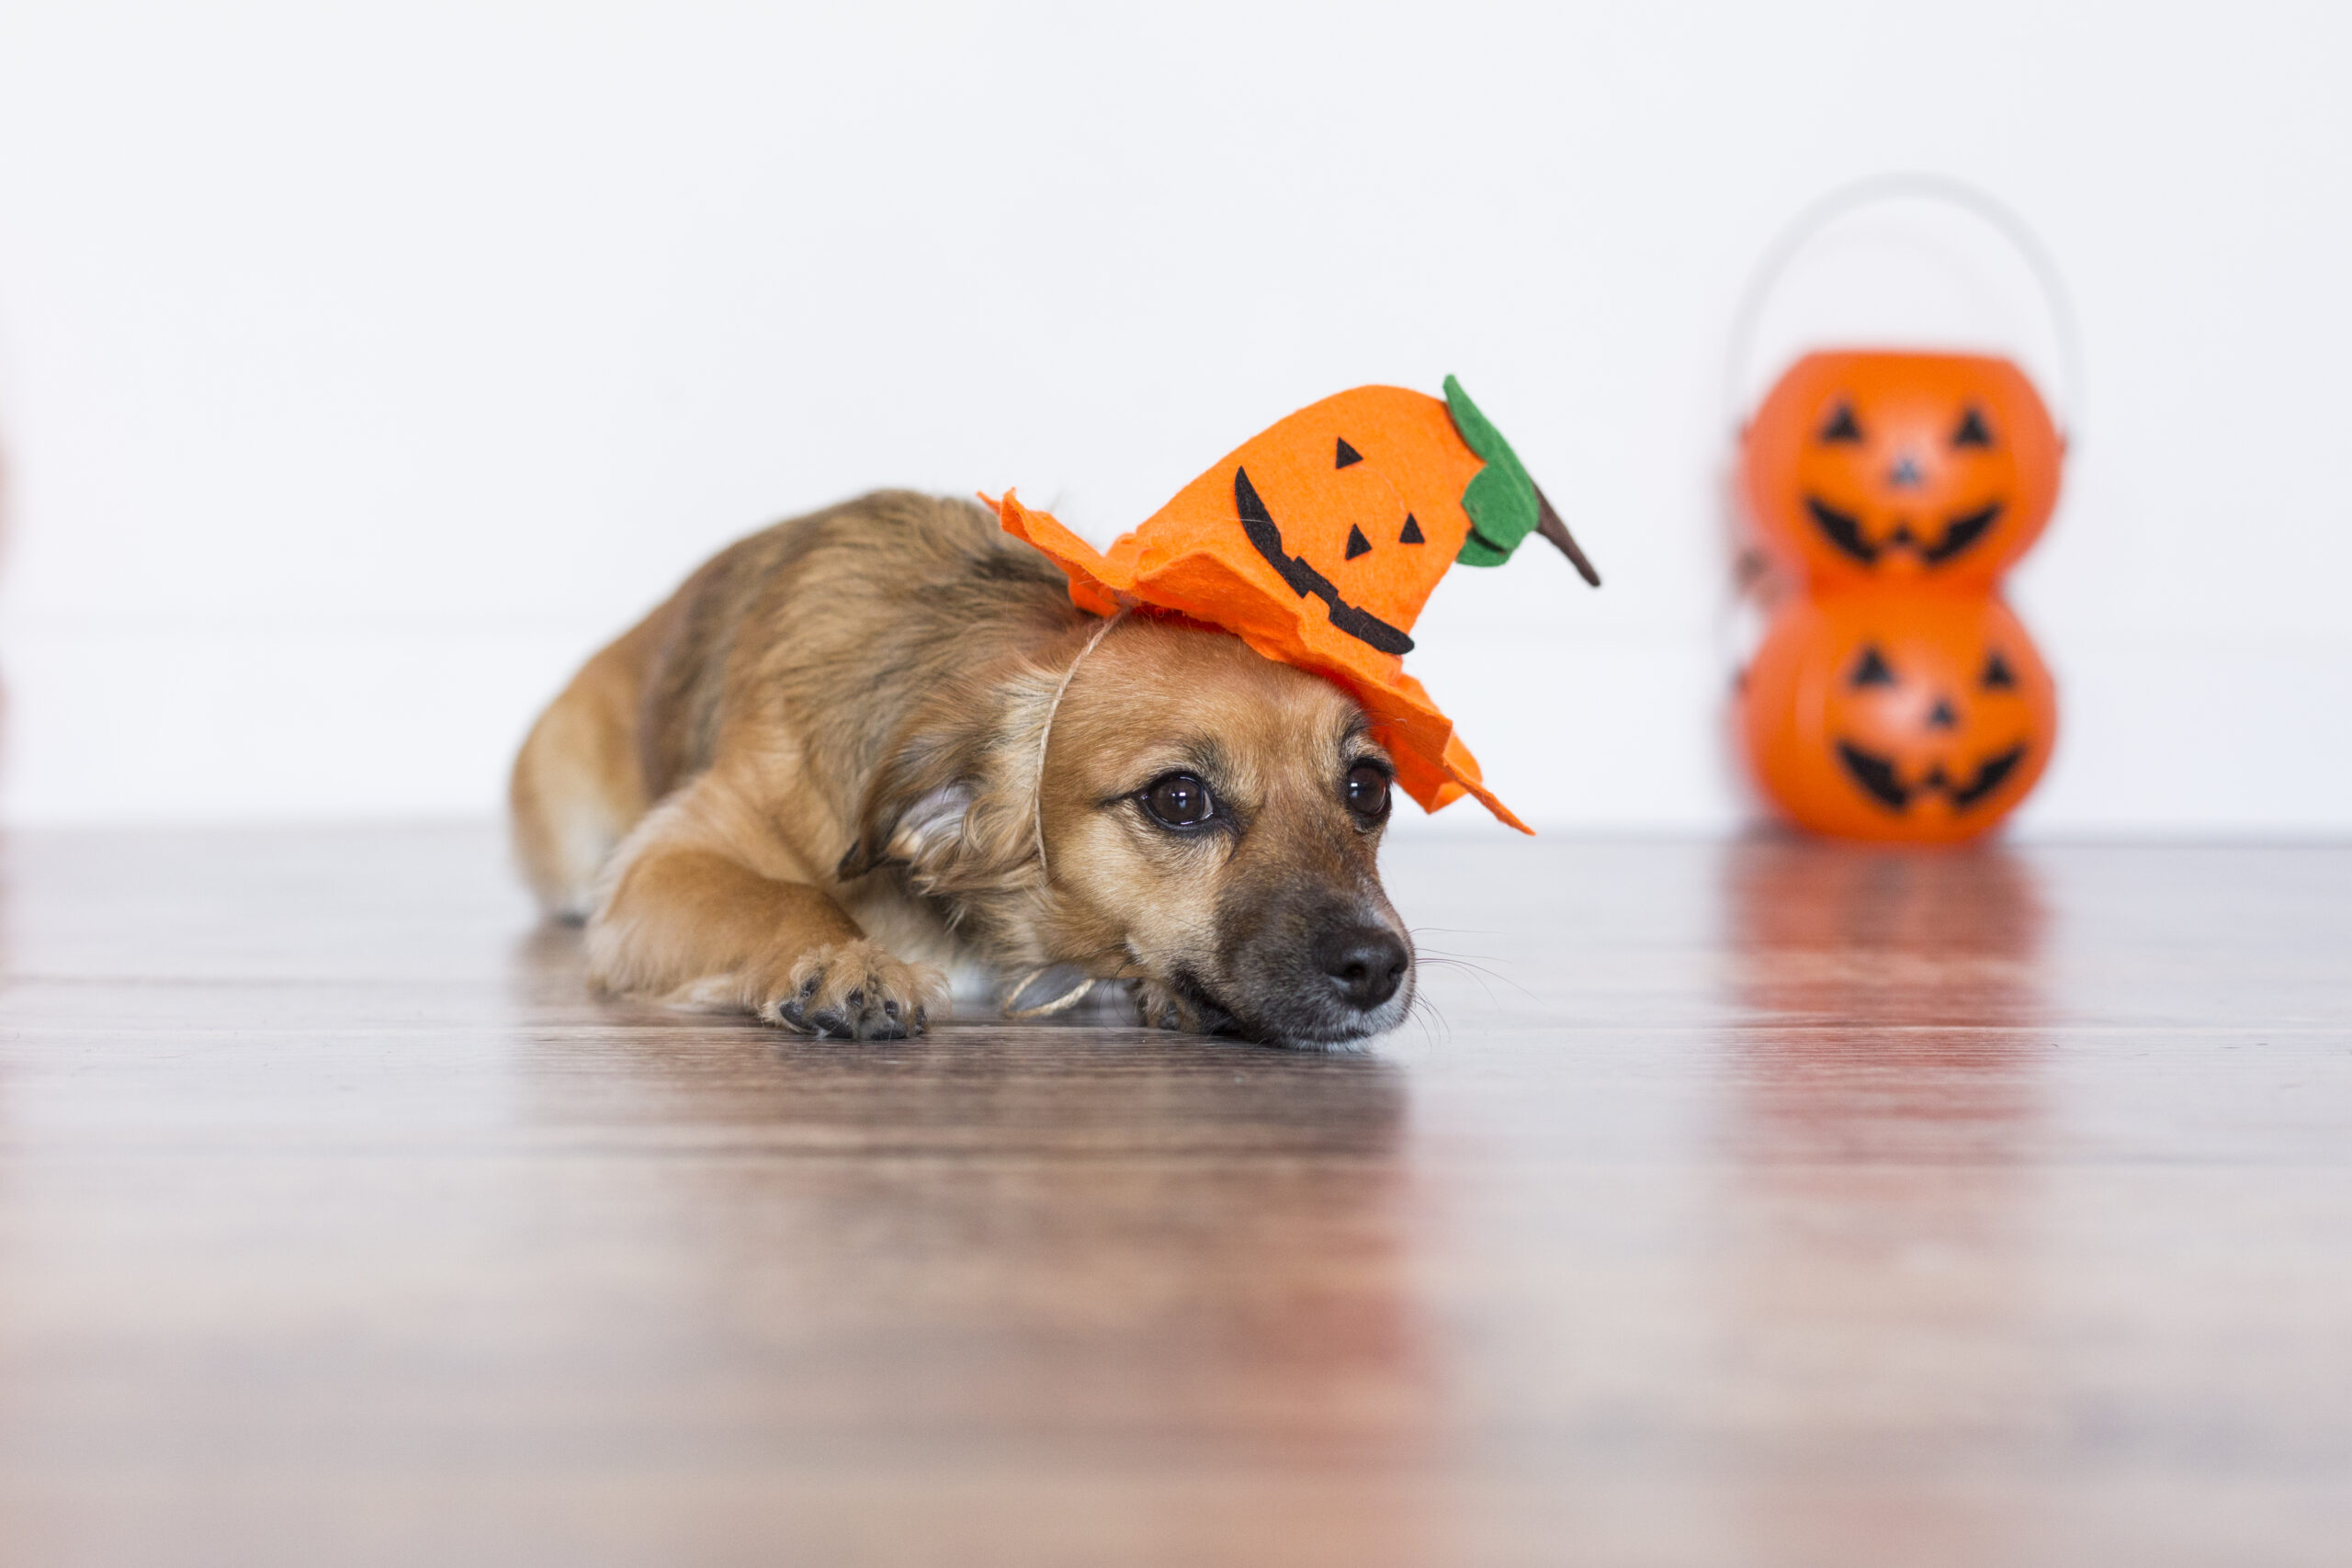 What should you do before giving a dog a treat? : know when to give your dog treats